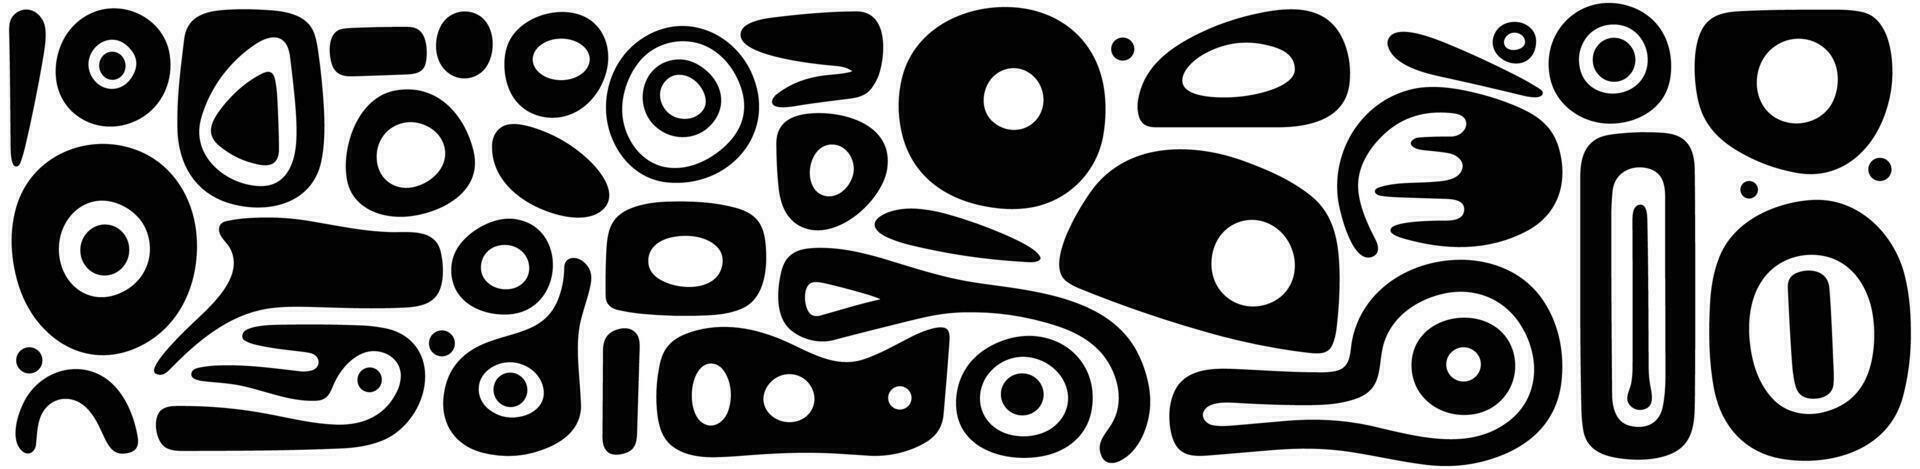 black and white circles, shapes and circles to create a wall pattern, in the style of bold lettering, animated gifs, elongated figures, found-object-centric, soft and rounded forms, webcam vector